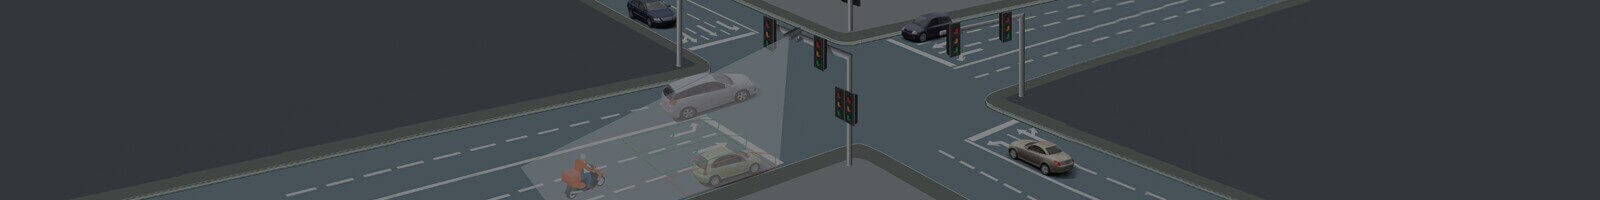 TrafScan®- Vehicle Detection Camera